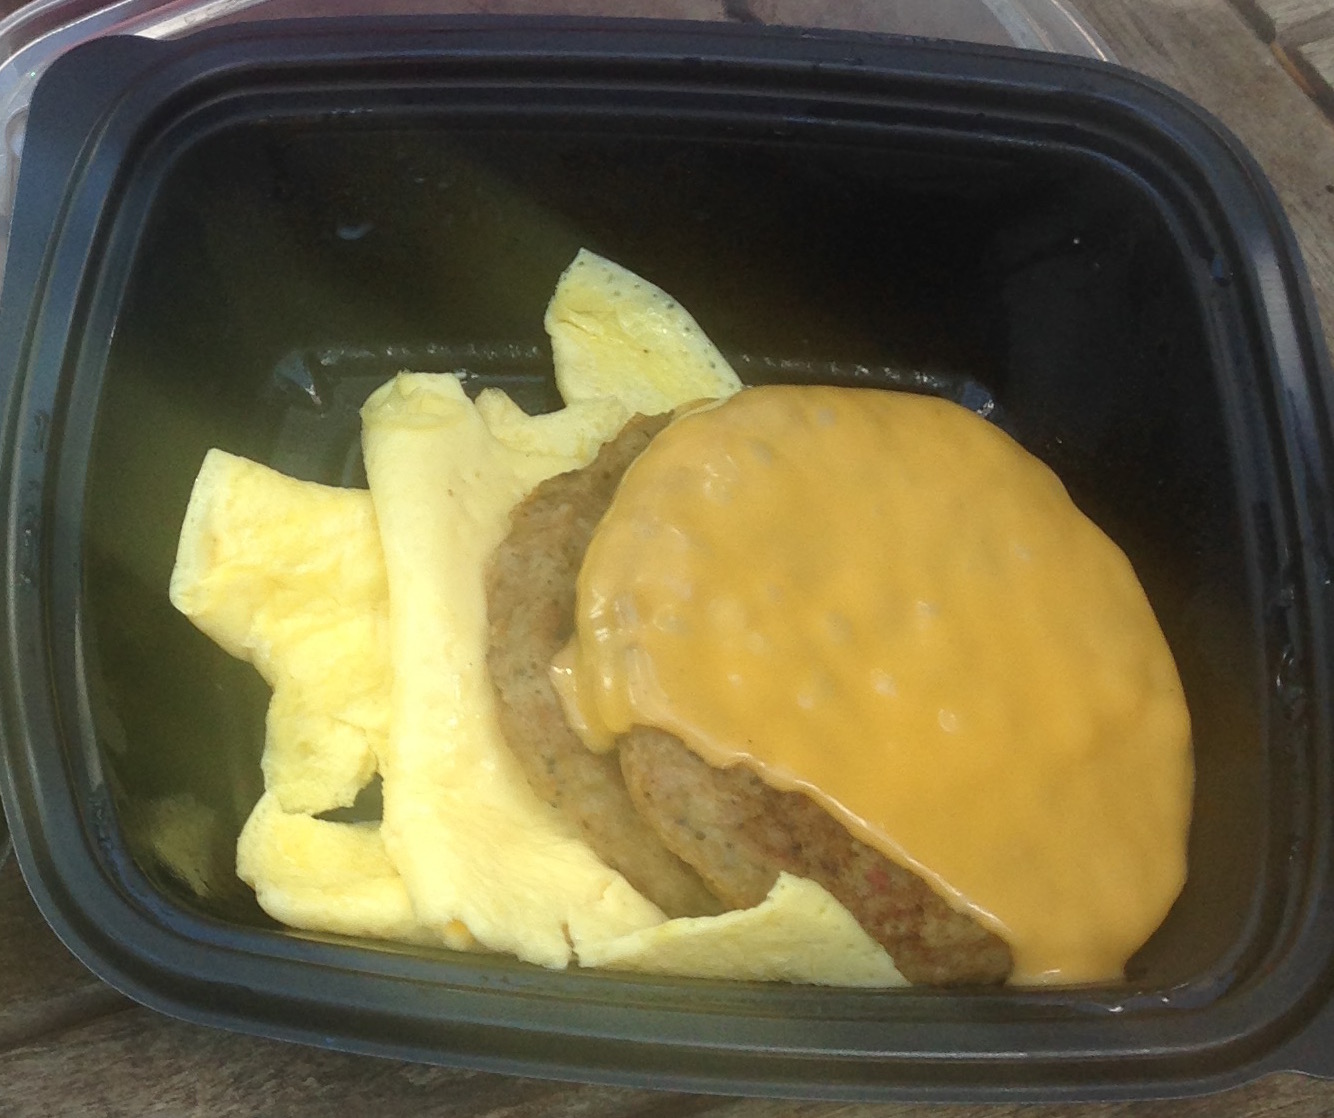 Low Carb Chick-Fil-A Sausage, Egg, & Cheese Biscuit